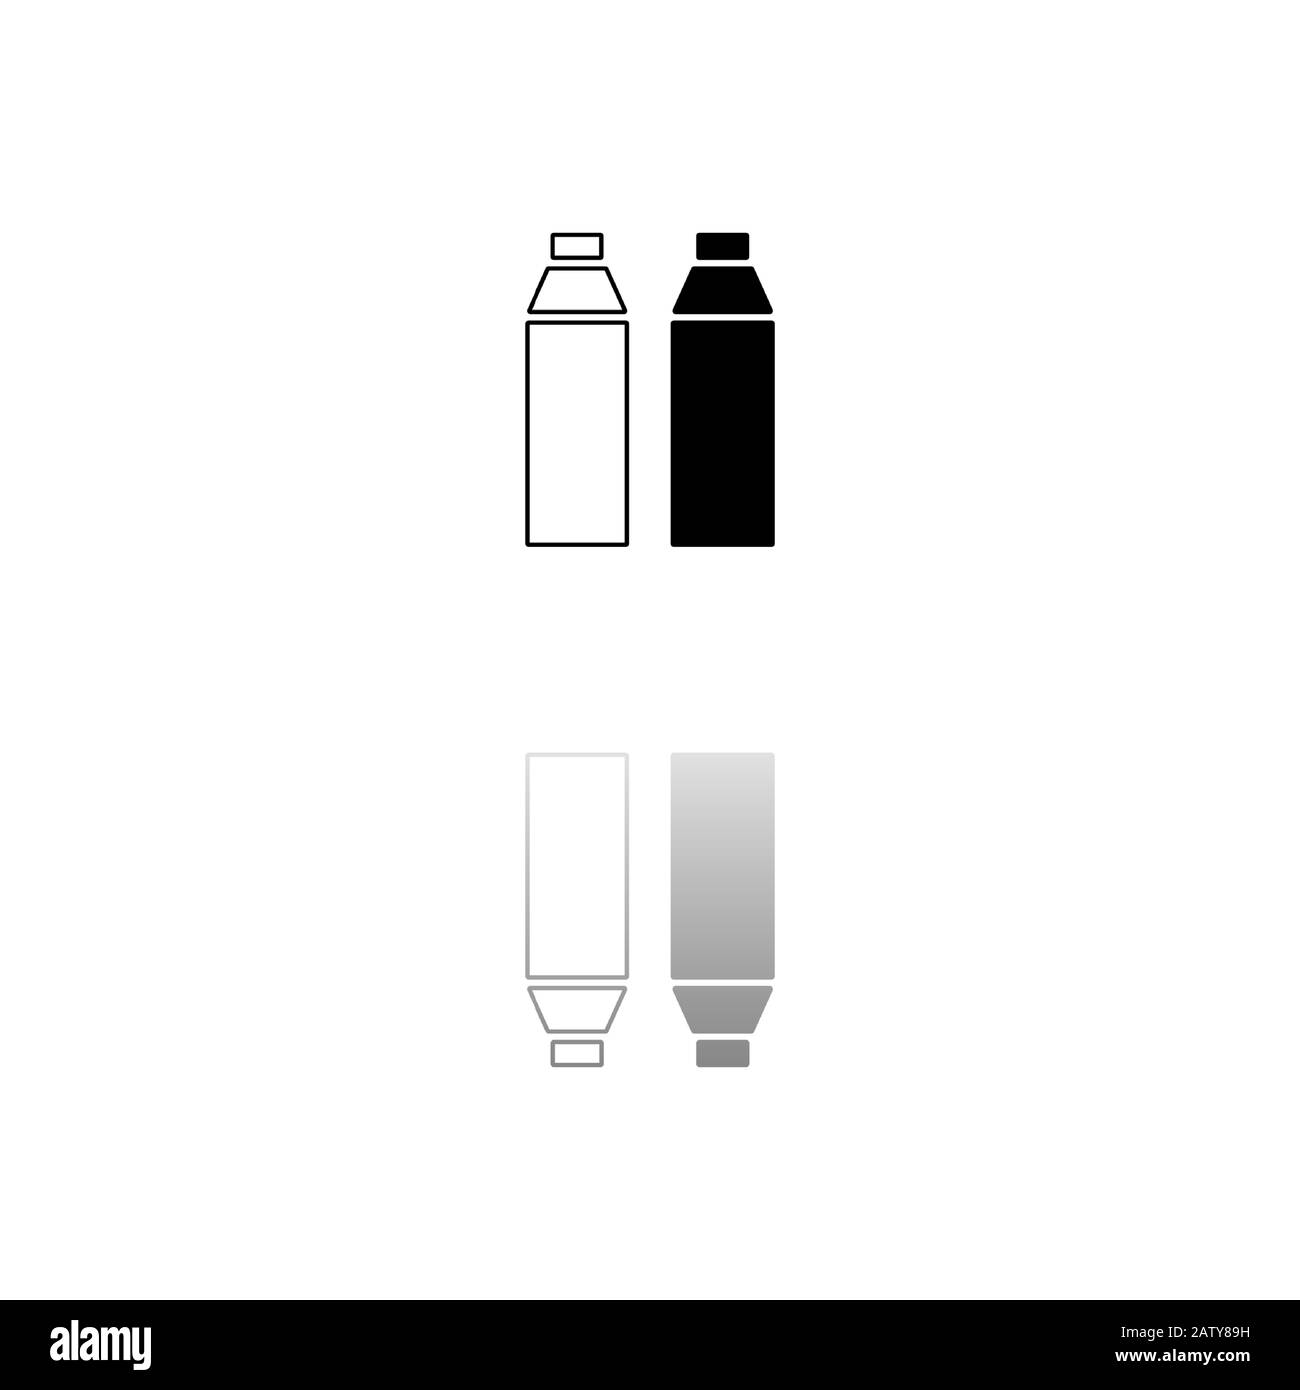 Plastic bottle. Black symbol on white background. Simple illustration. Flat Vector Icon. Mirror Reflection Shadow. Can be used in logo, web, mobile an Stock Vector